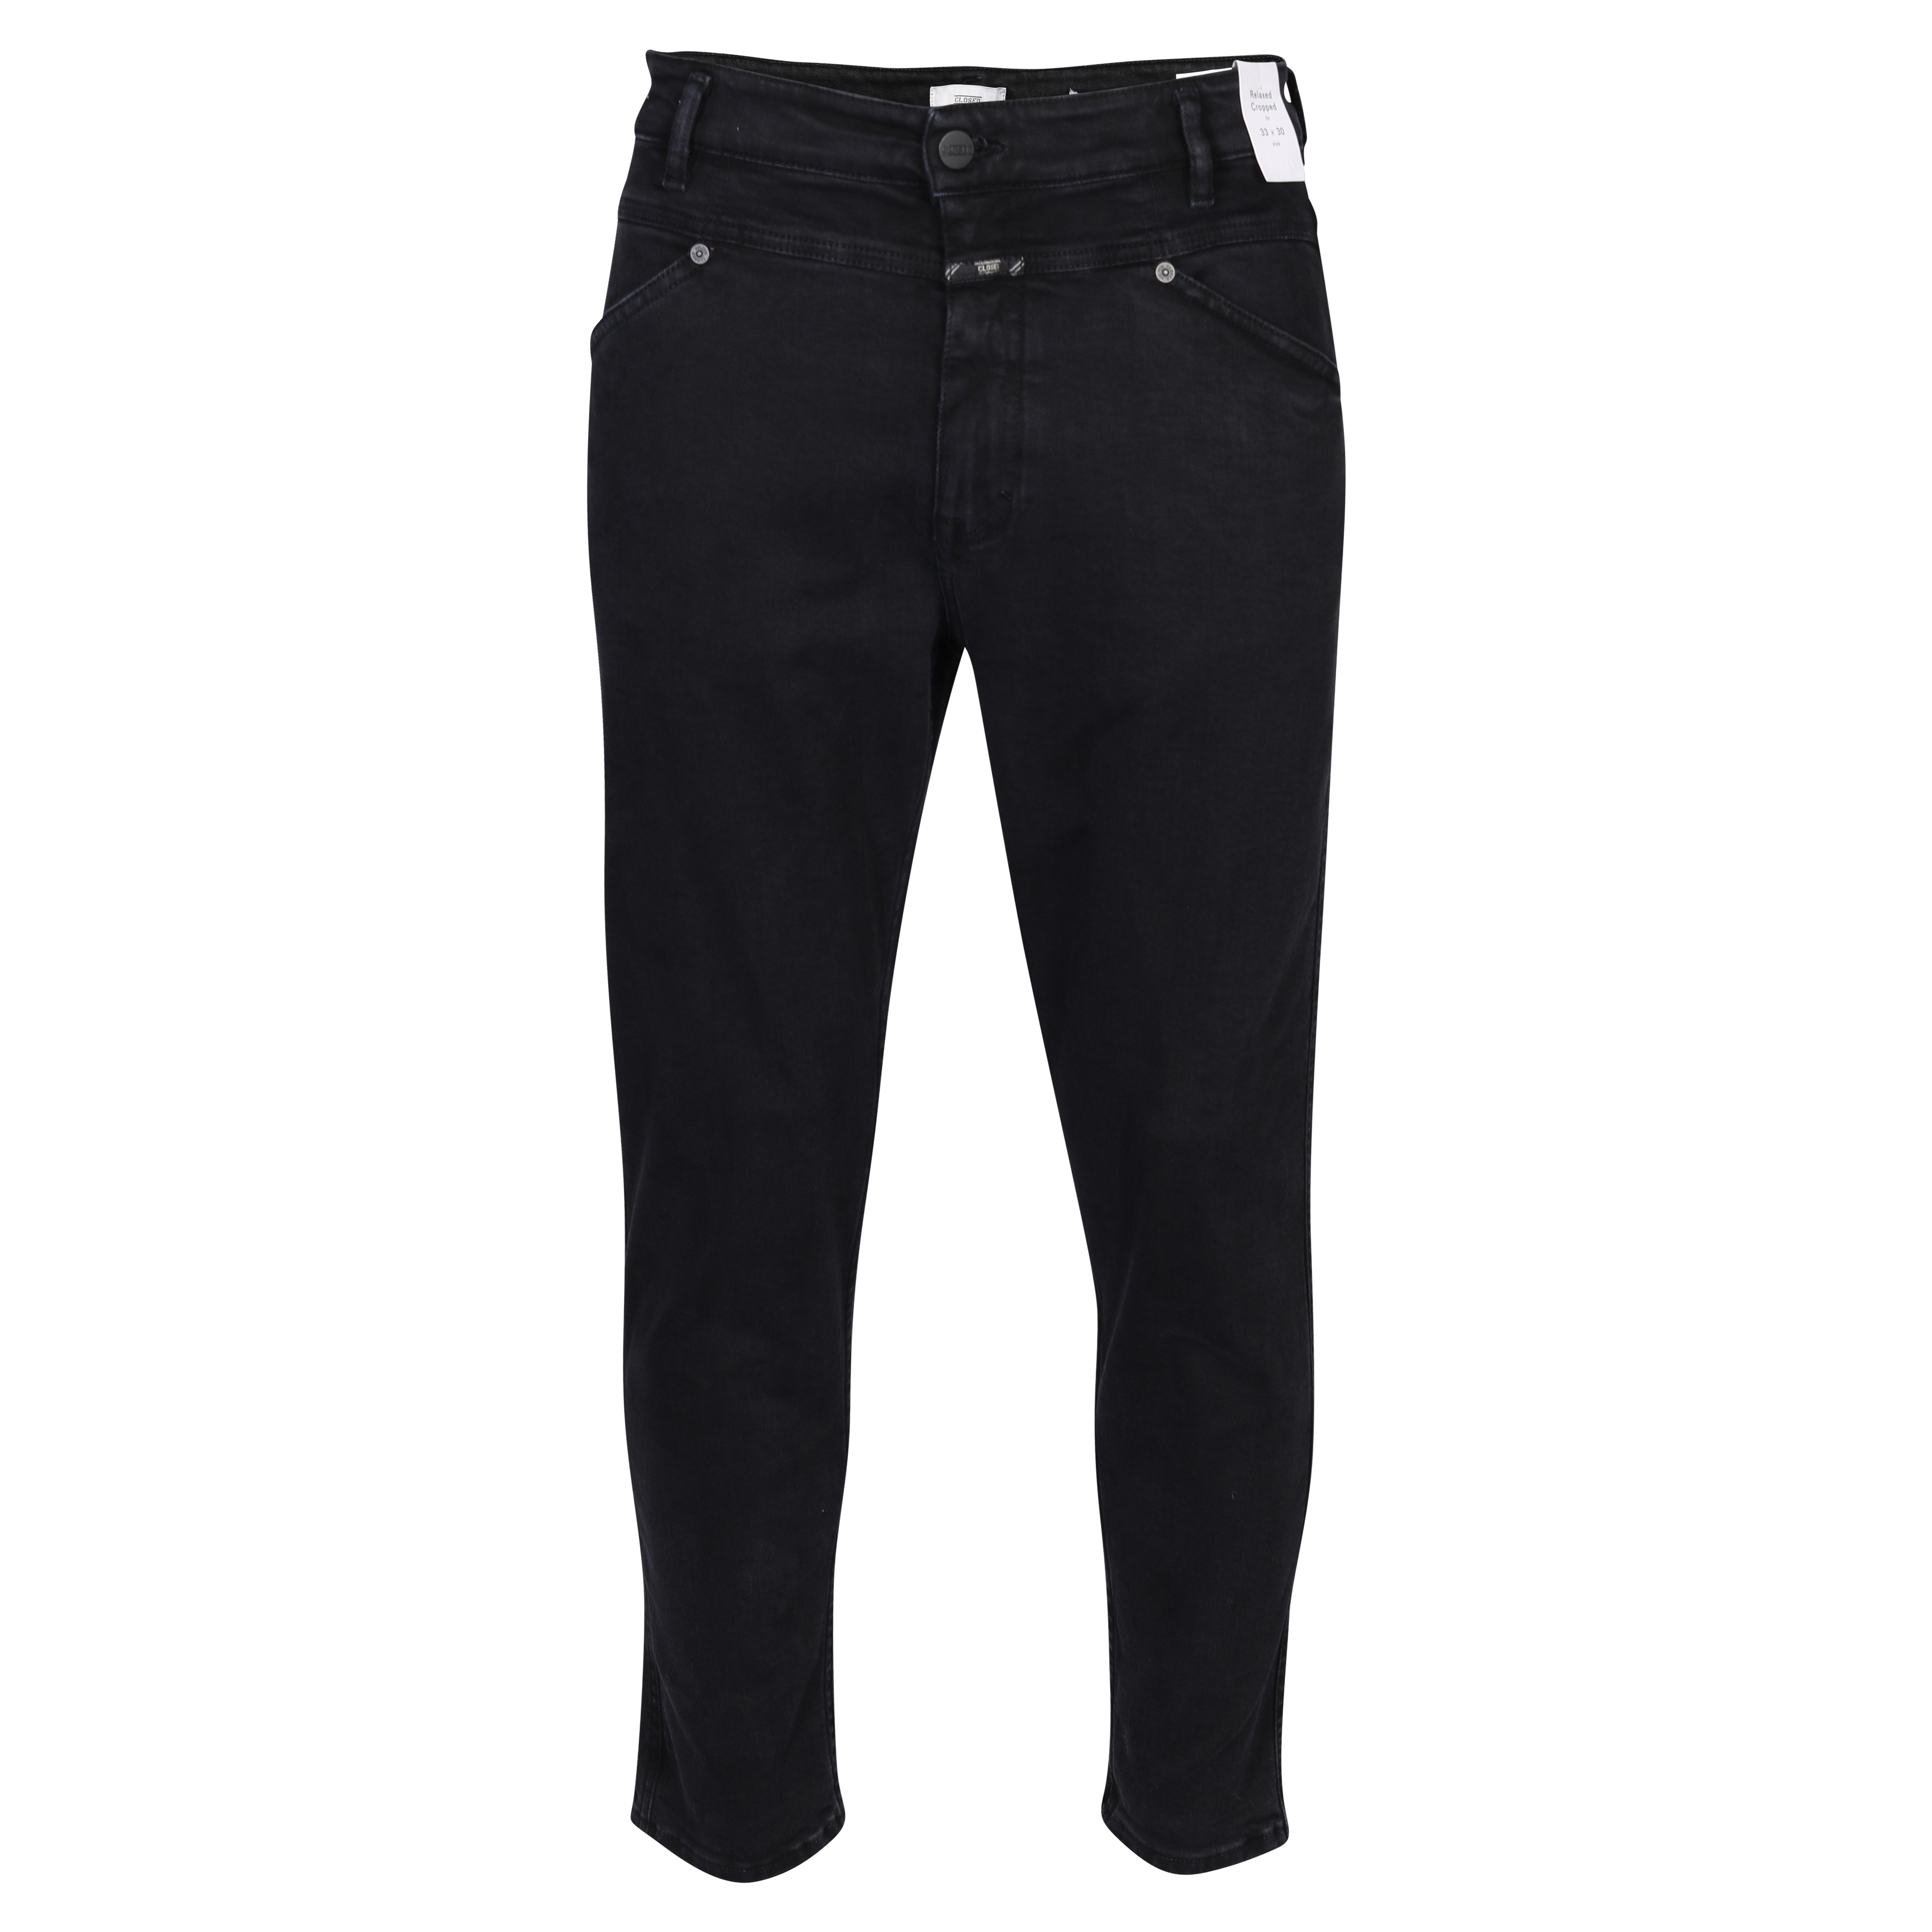 CLOSED X-Lent Tapered Jeans in Black 34